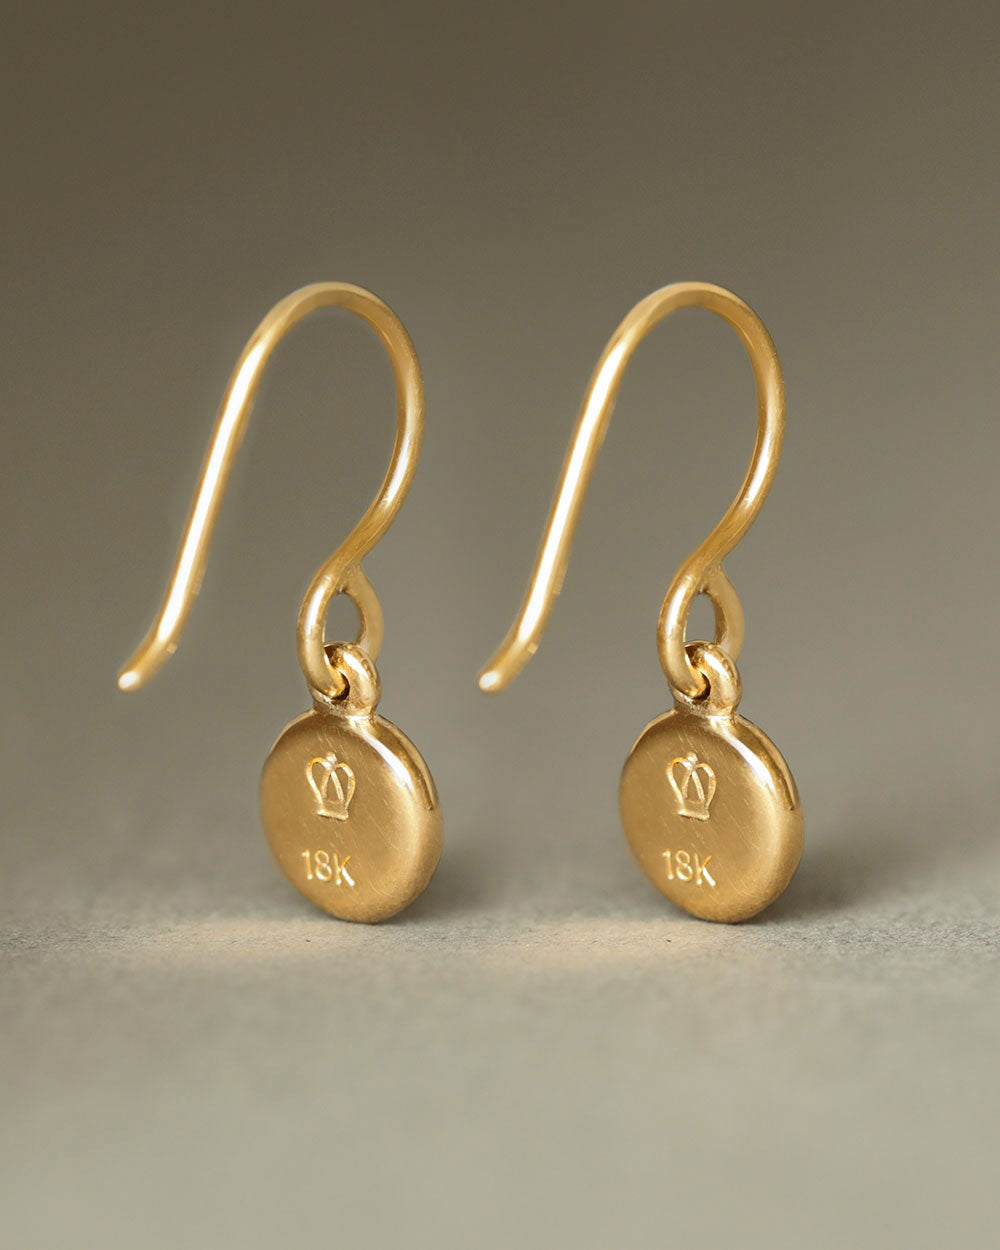 Solid 18k gold dangle earrings with a soft concave button hanging from 18k gold french wires